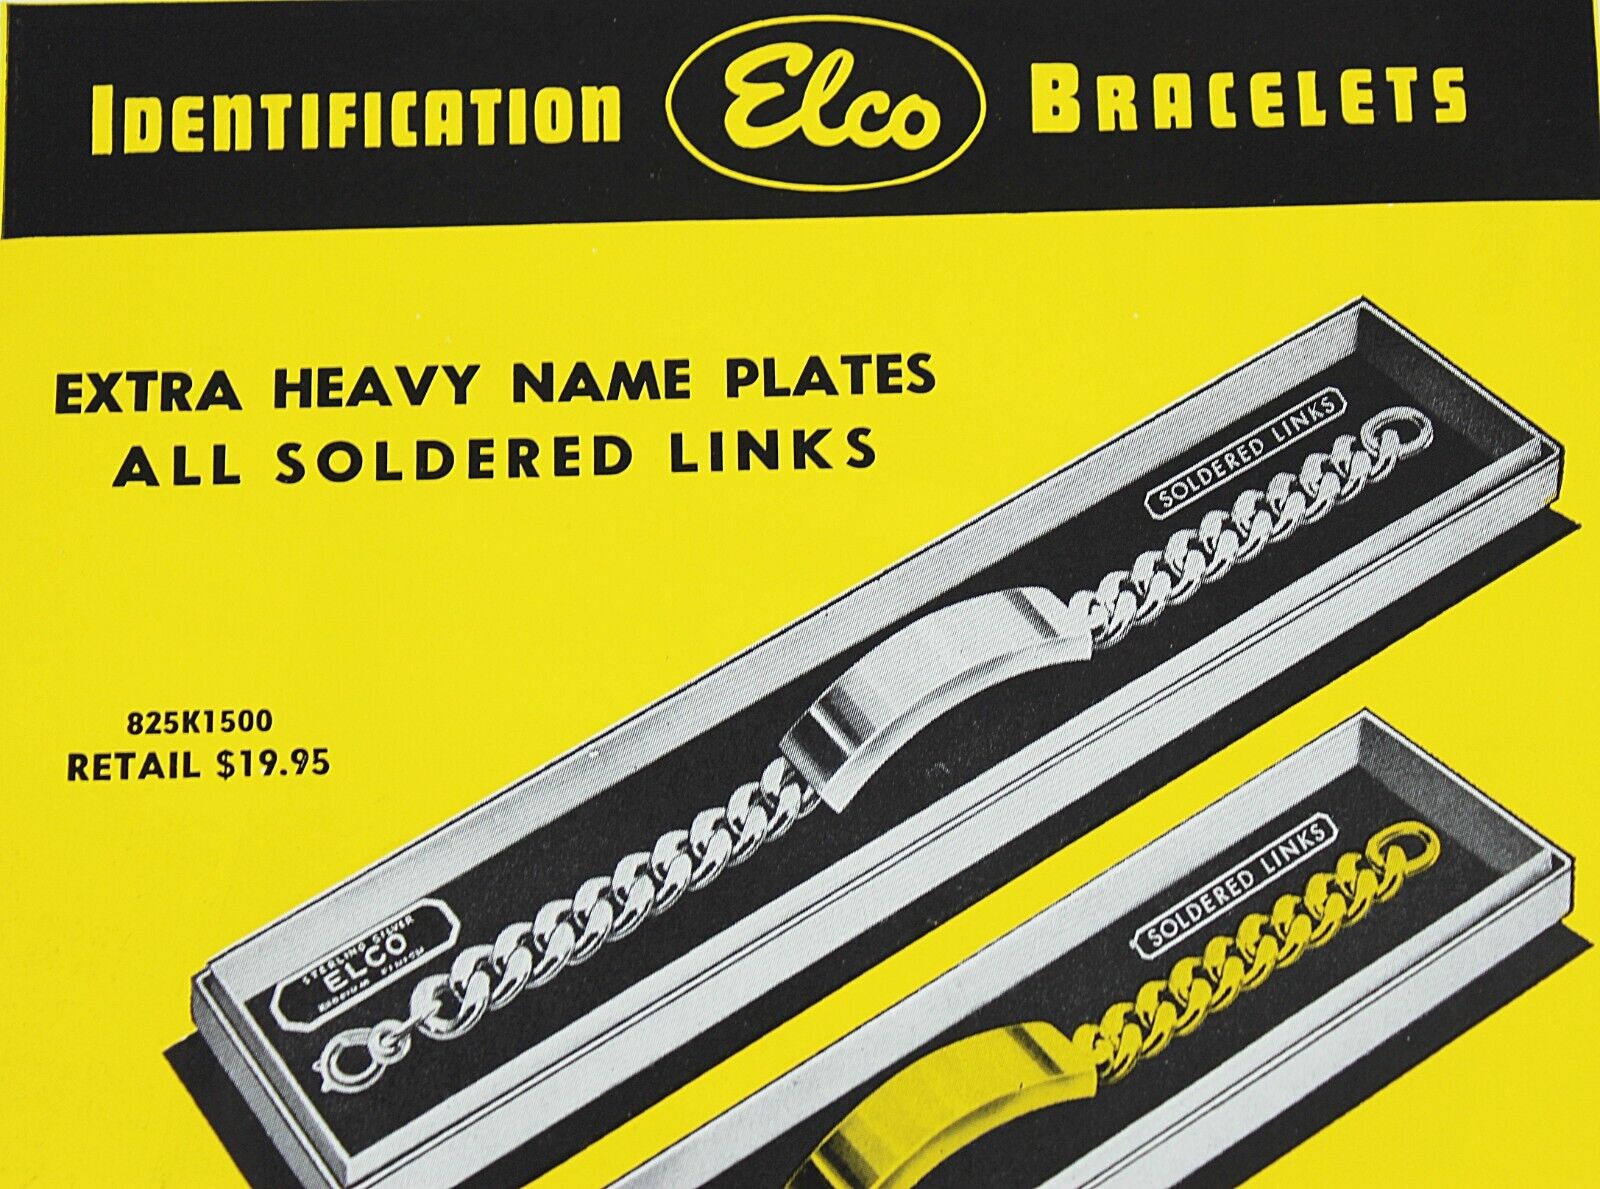 Original Vintage 1952 ELCO Identification Bracelet Print Ad in Color with Prices